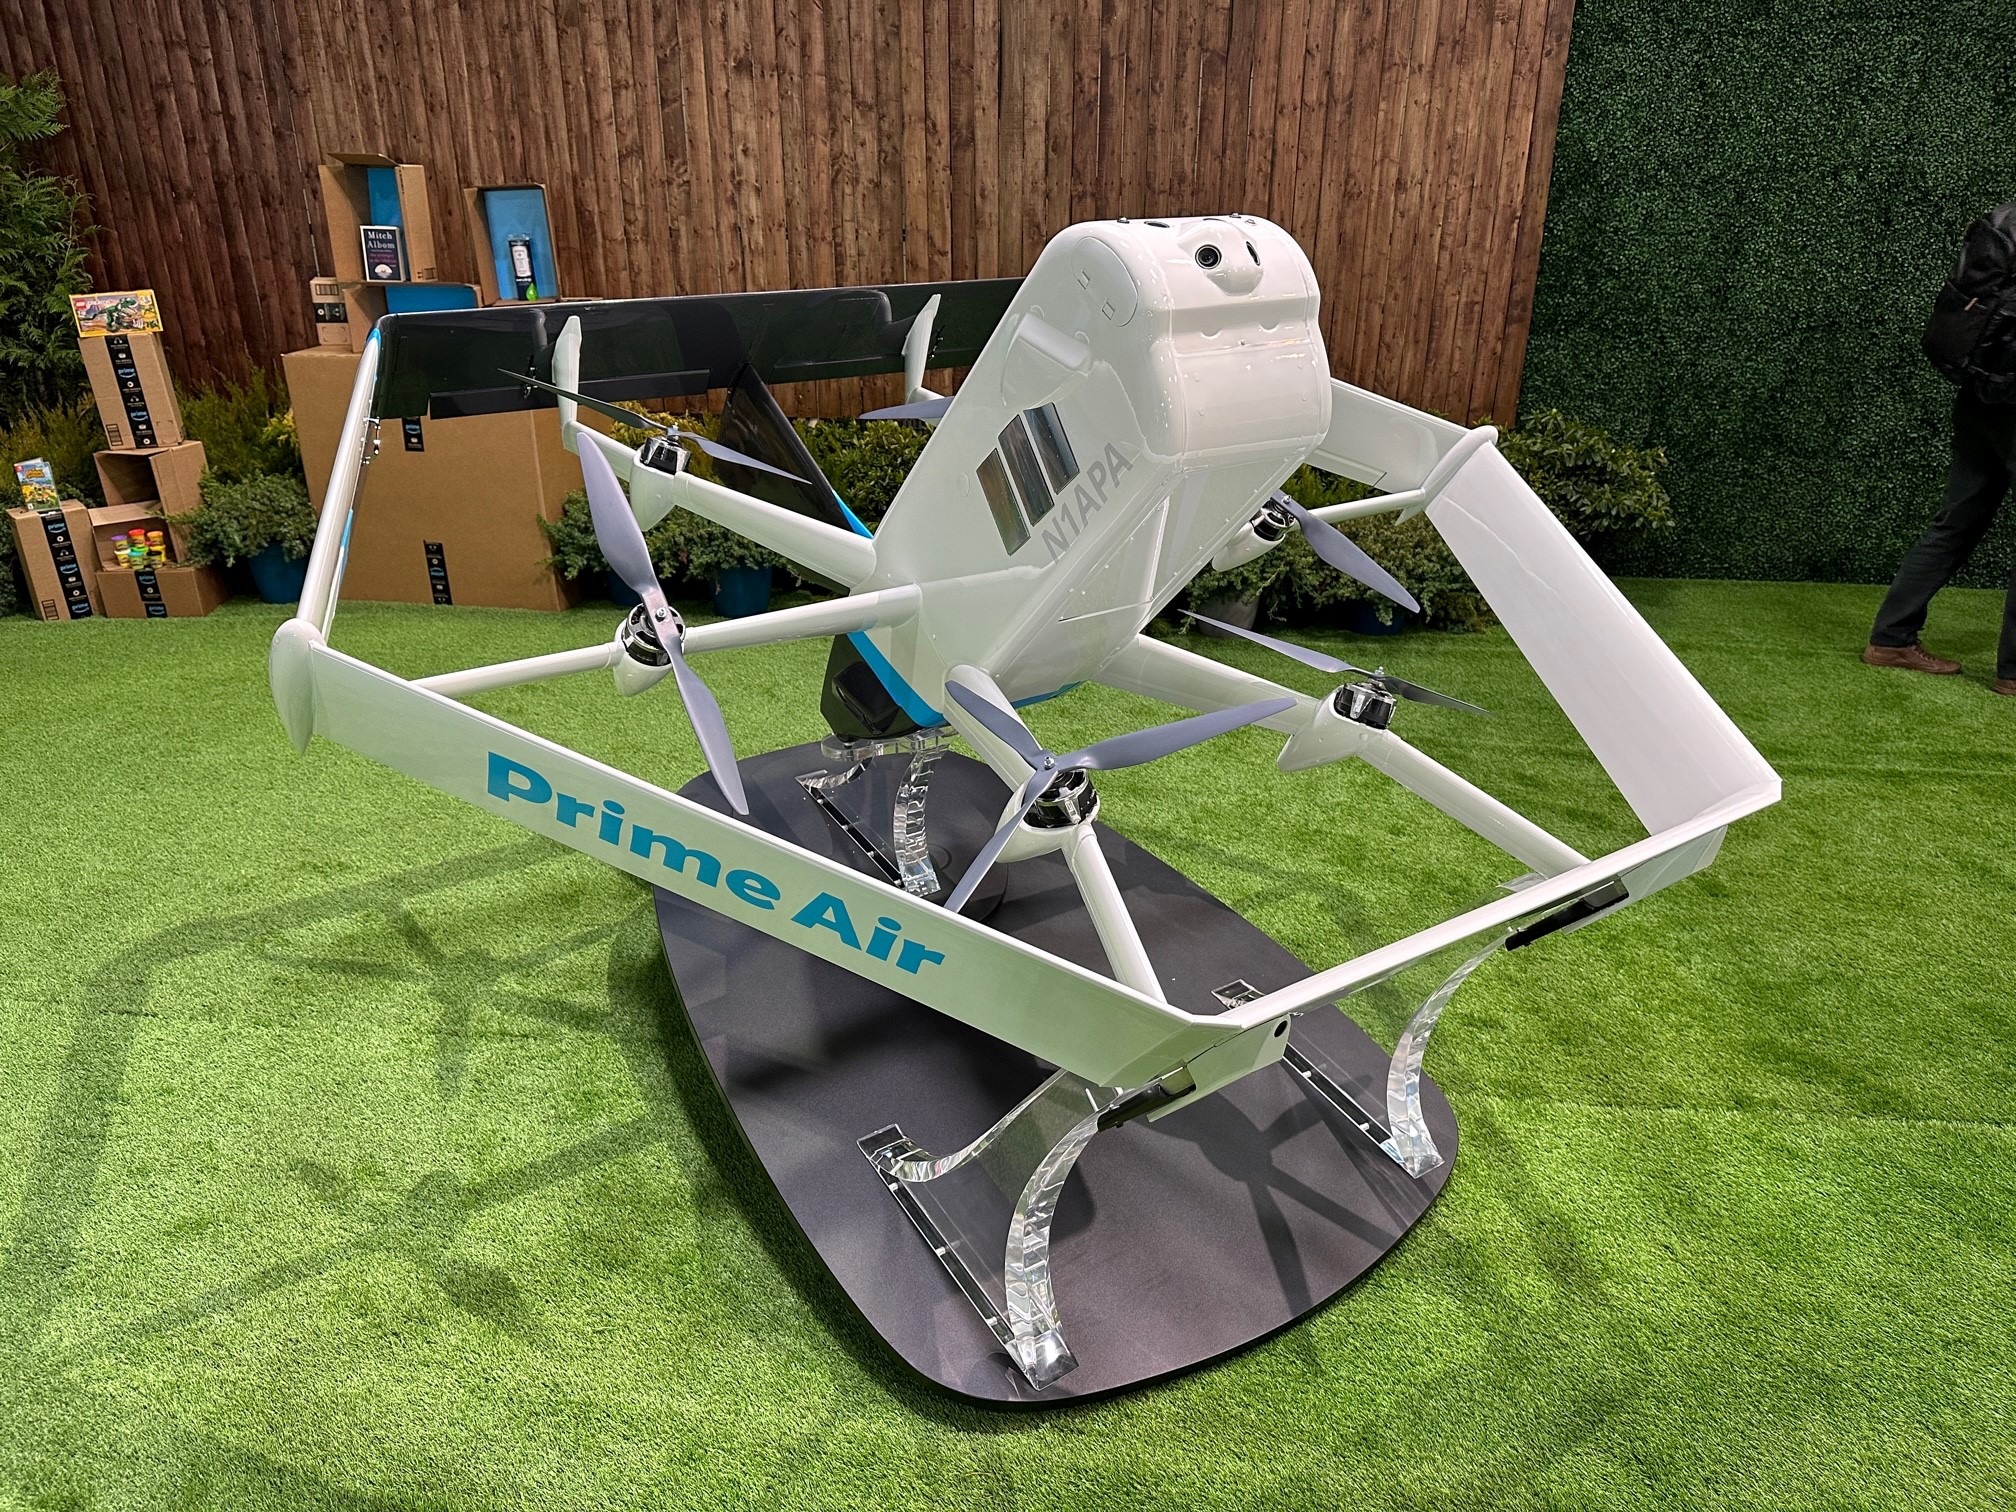 An experimental delivery drone called Prime Air